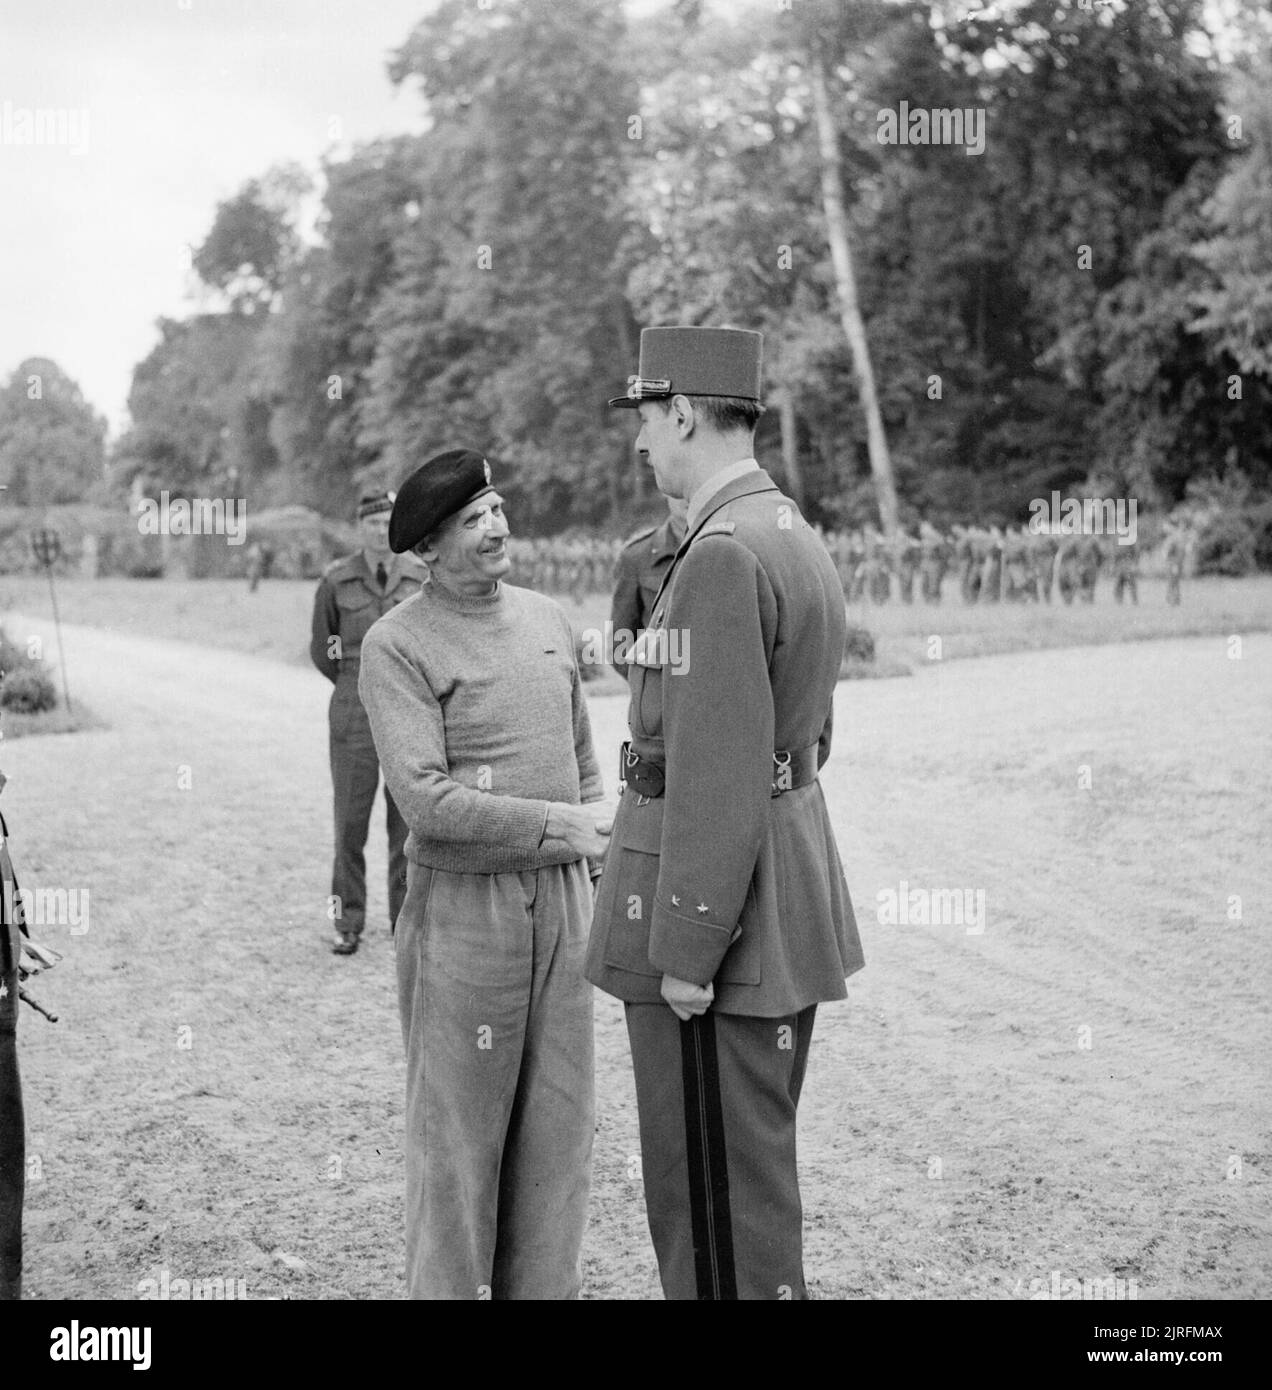 General Charles de Gaulle with General Montgomery at his HQ in France, 14 June 1944. General Charles de Gaulle with General Montgomery at his HQ in France, 14 June 1944. Stock Photo